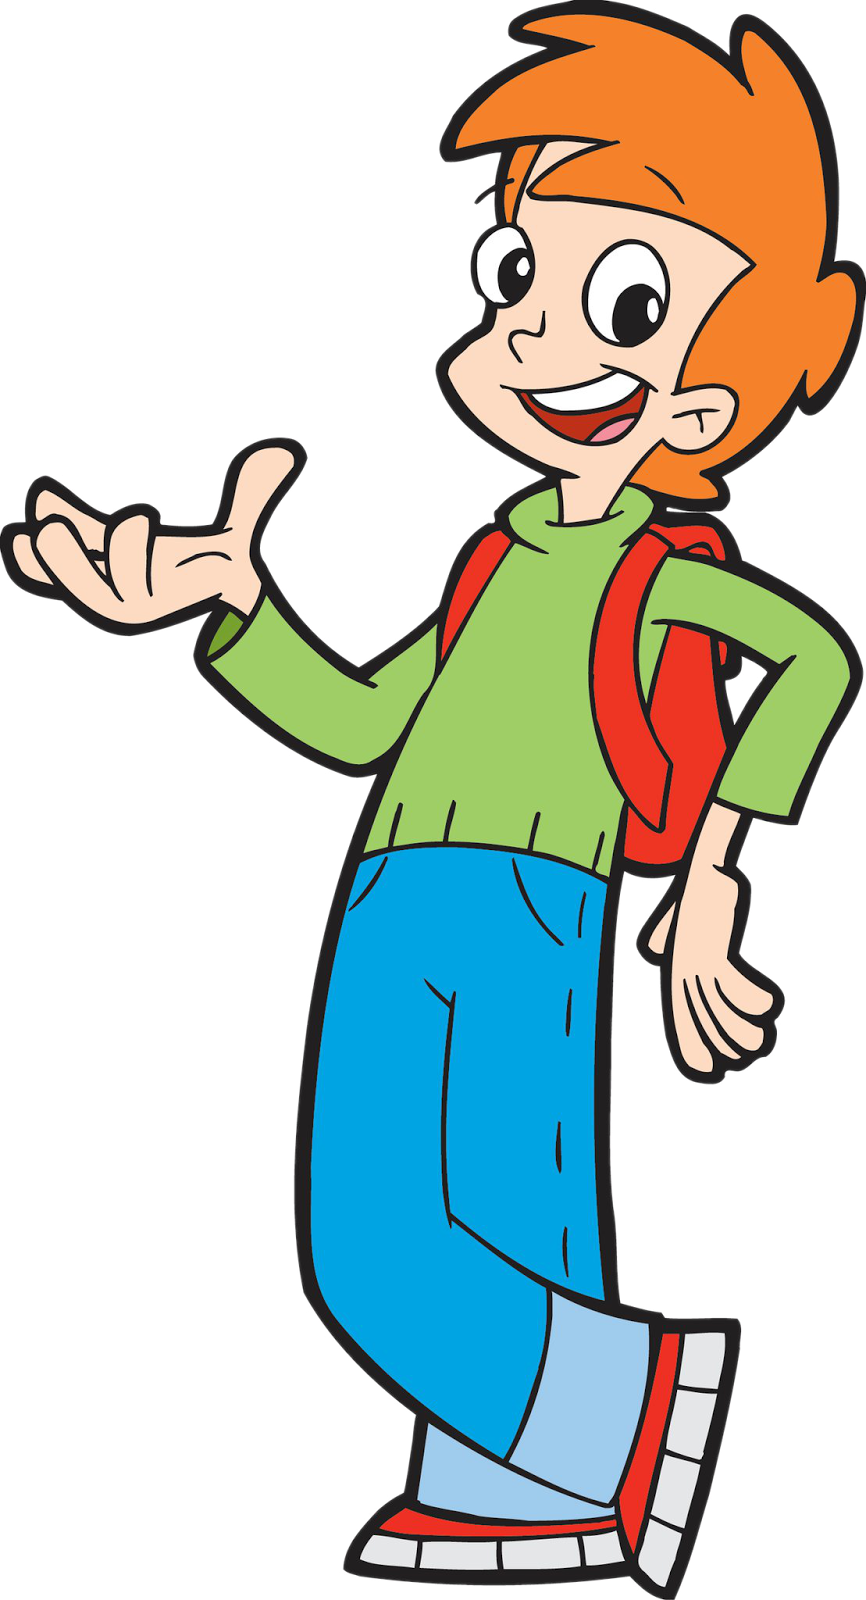 Cartoon Characters: Cyberchase (